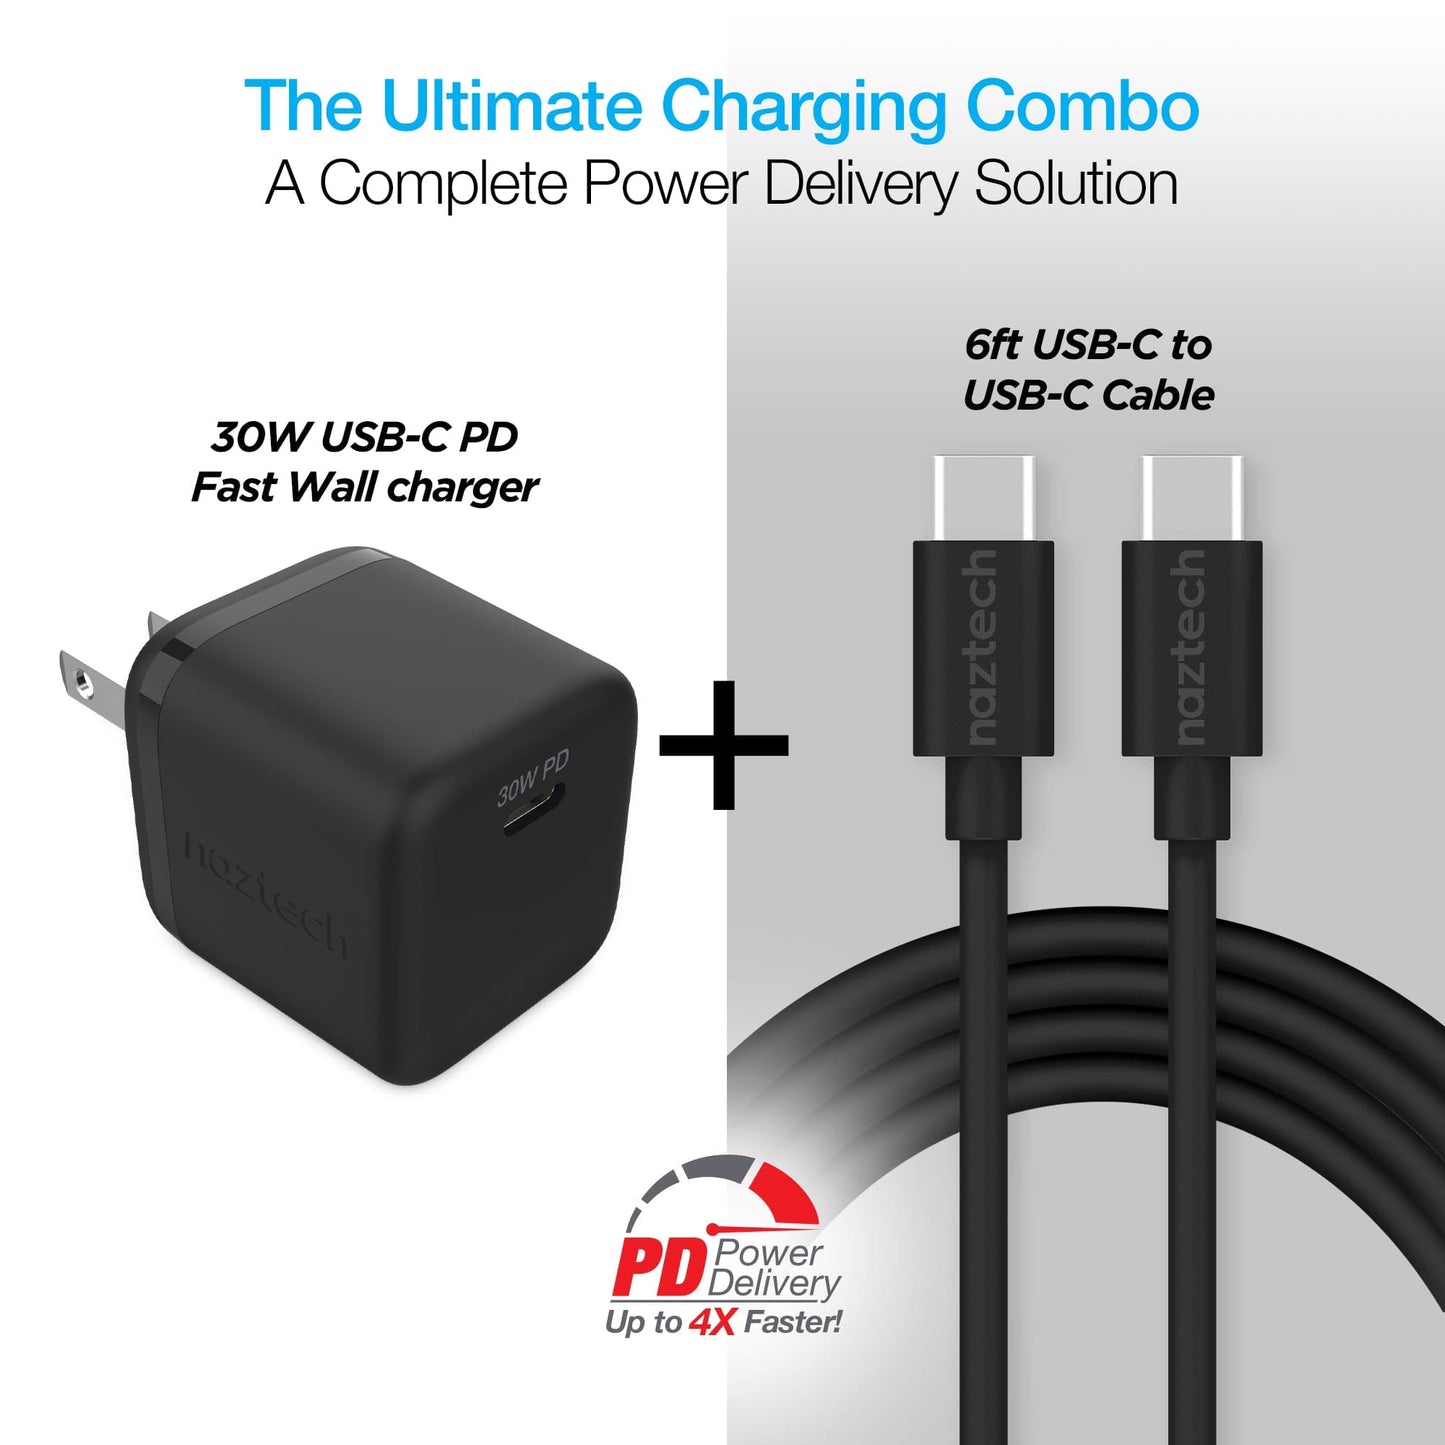 Naztech 30W USB-C PD Fast Wall Charger - 6ft USB-C Cable - Black